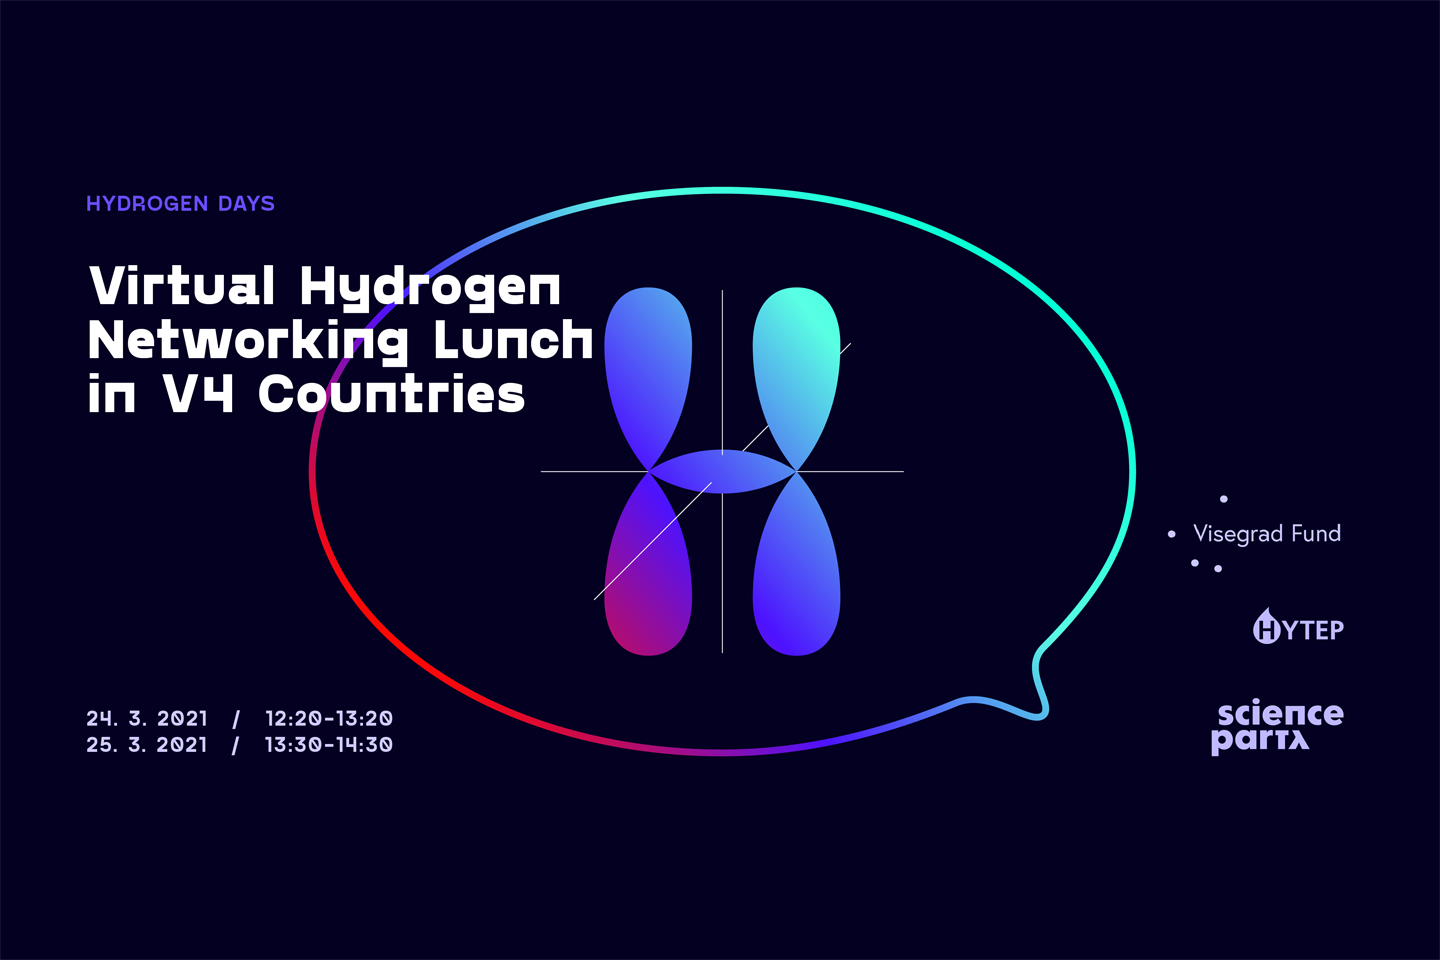 Virtual Hydrogen Networking Lunch in V4 Countries